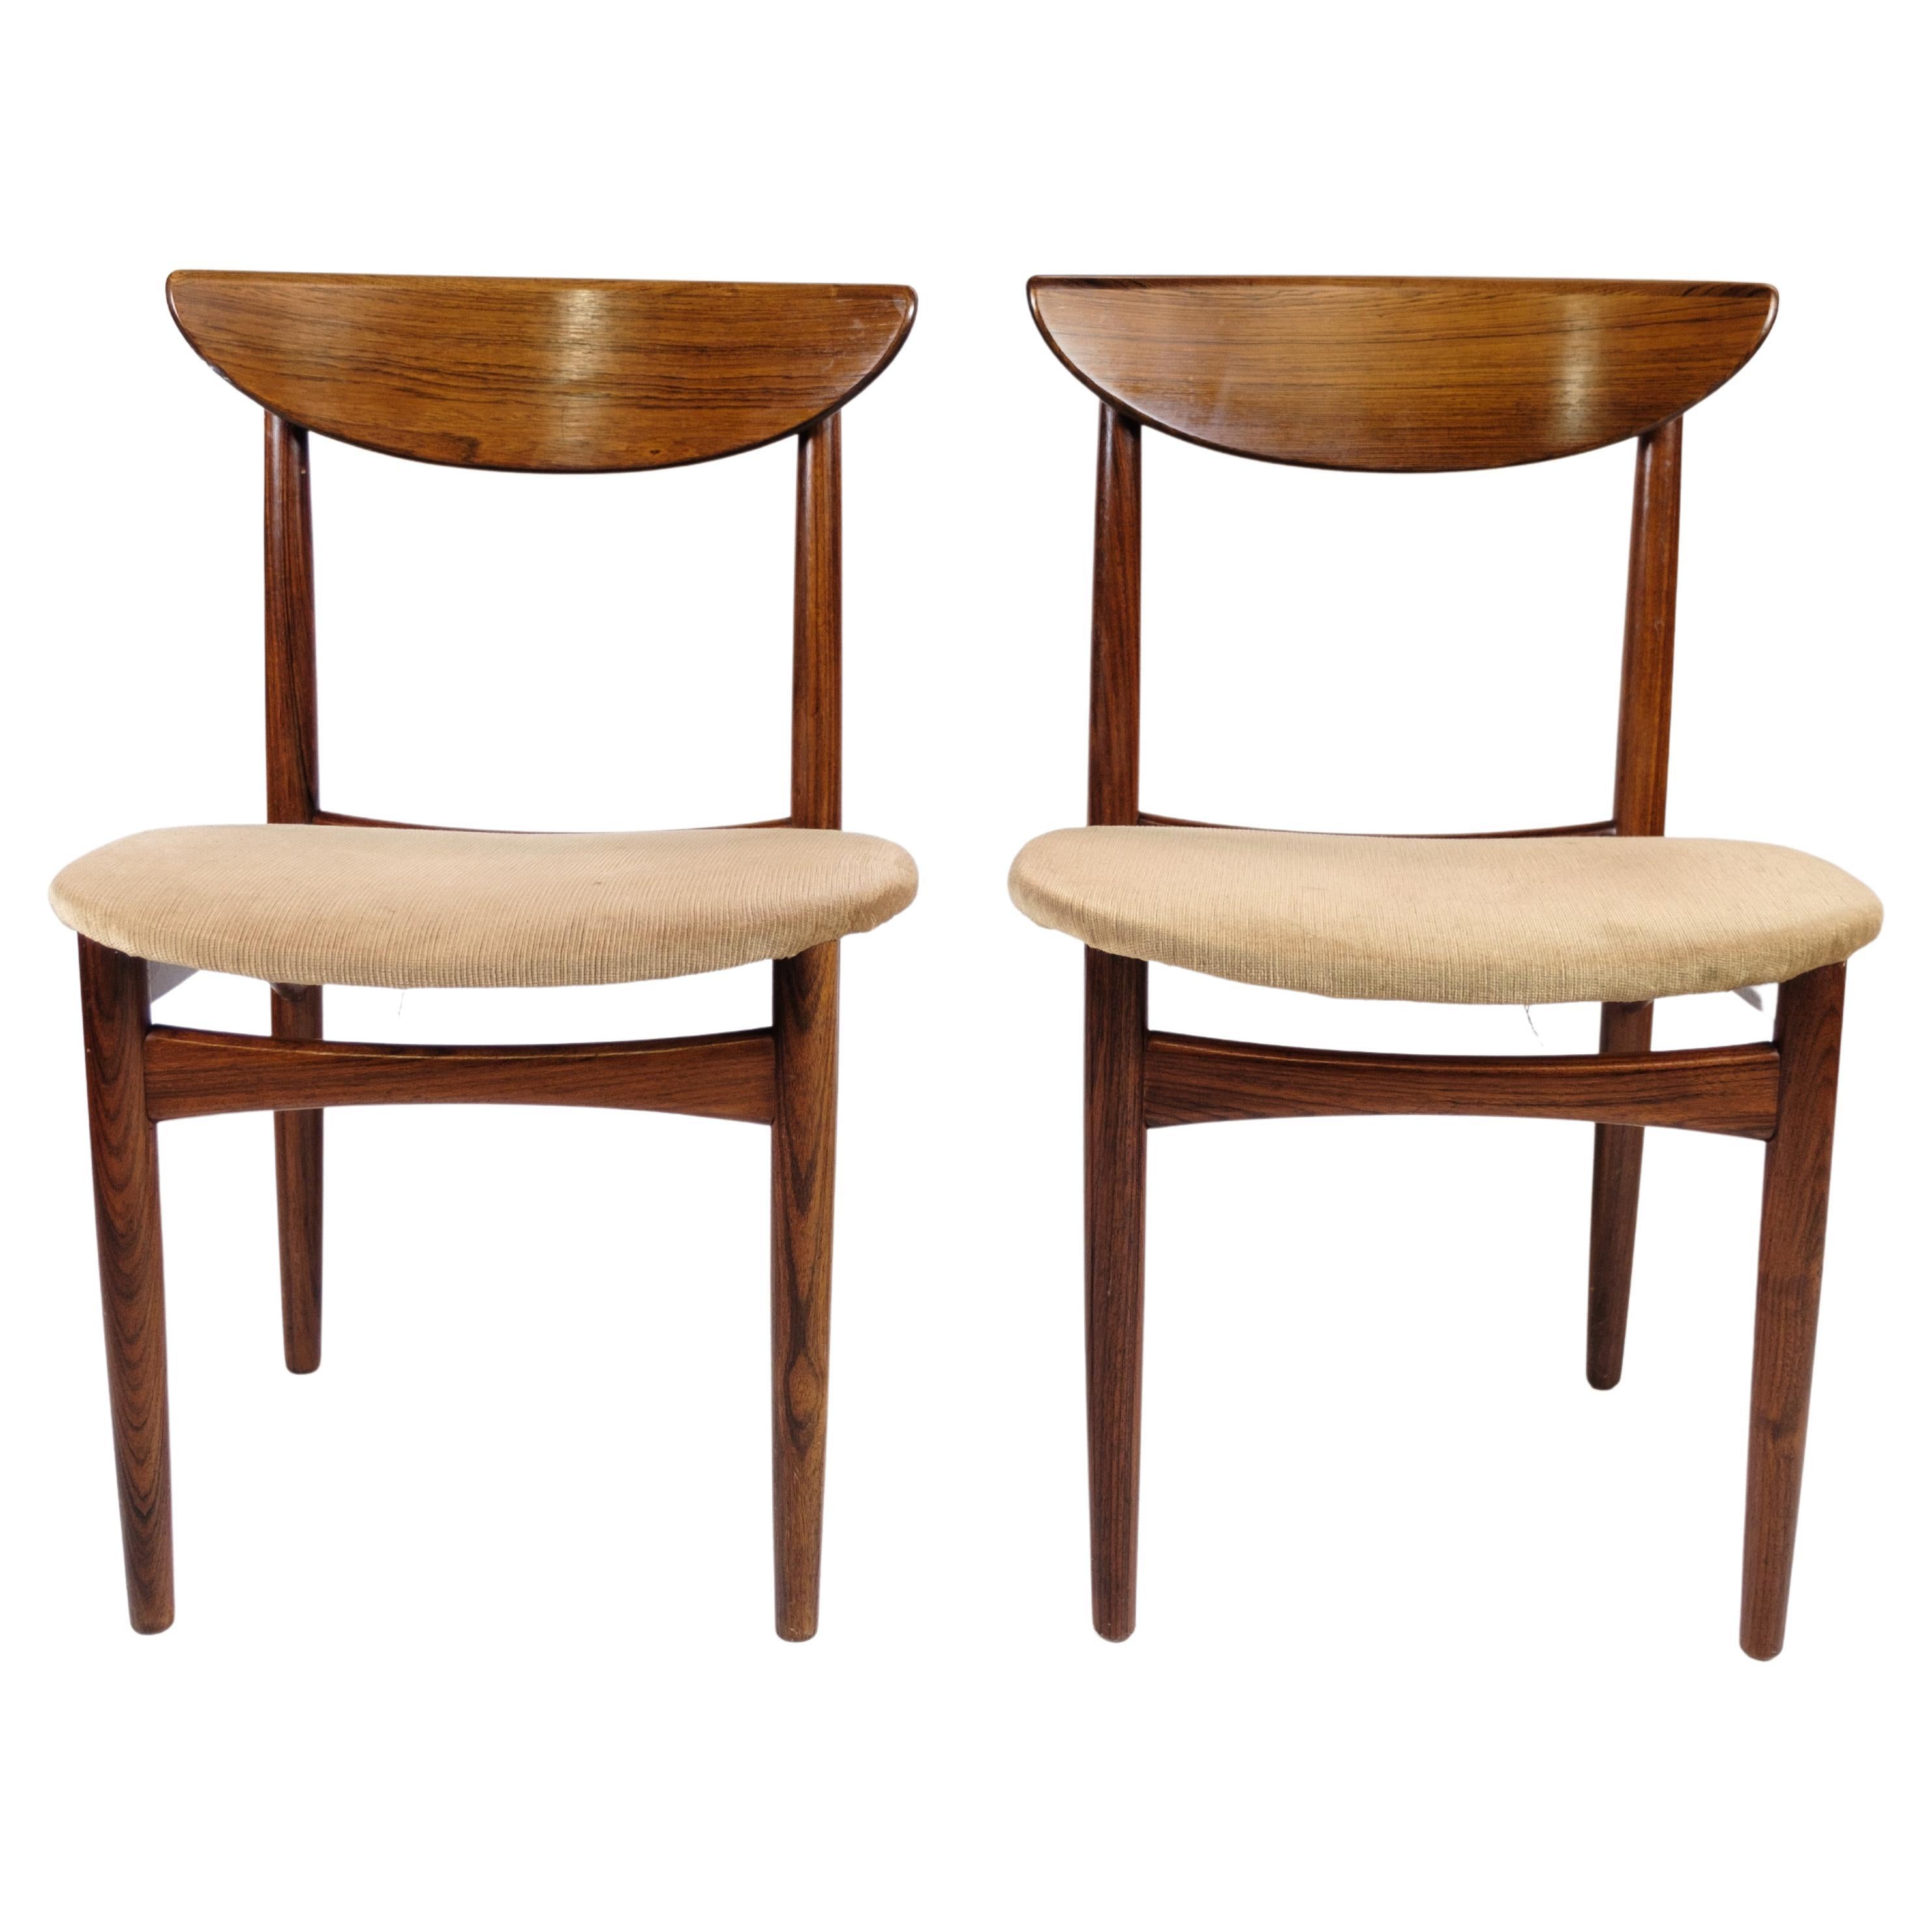 Set of 2 Chairs Made In Rosewood By Peter Hvidt From 1960s For Sale